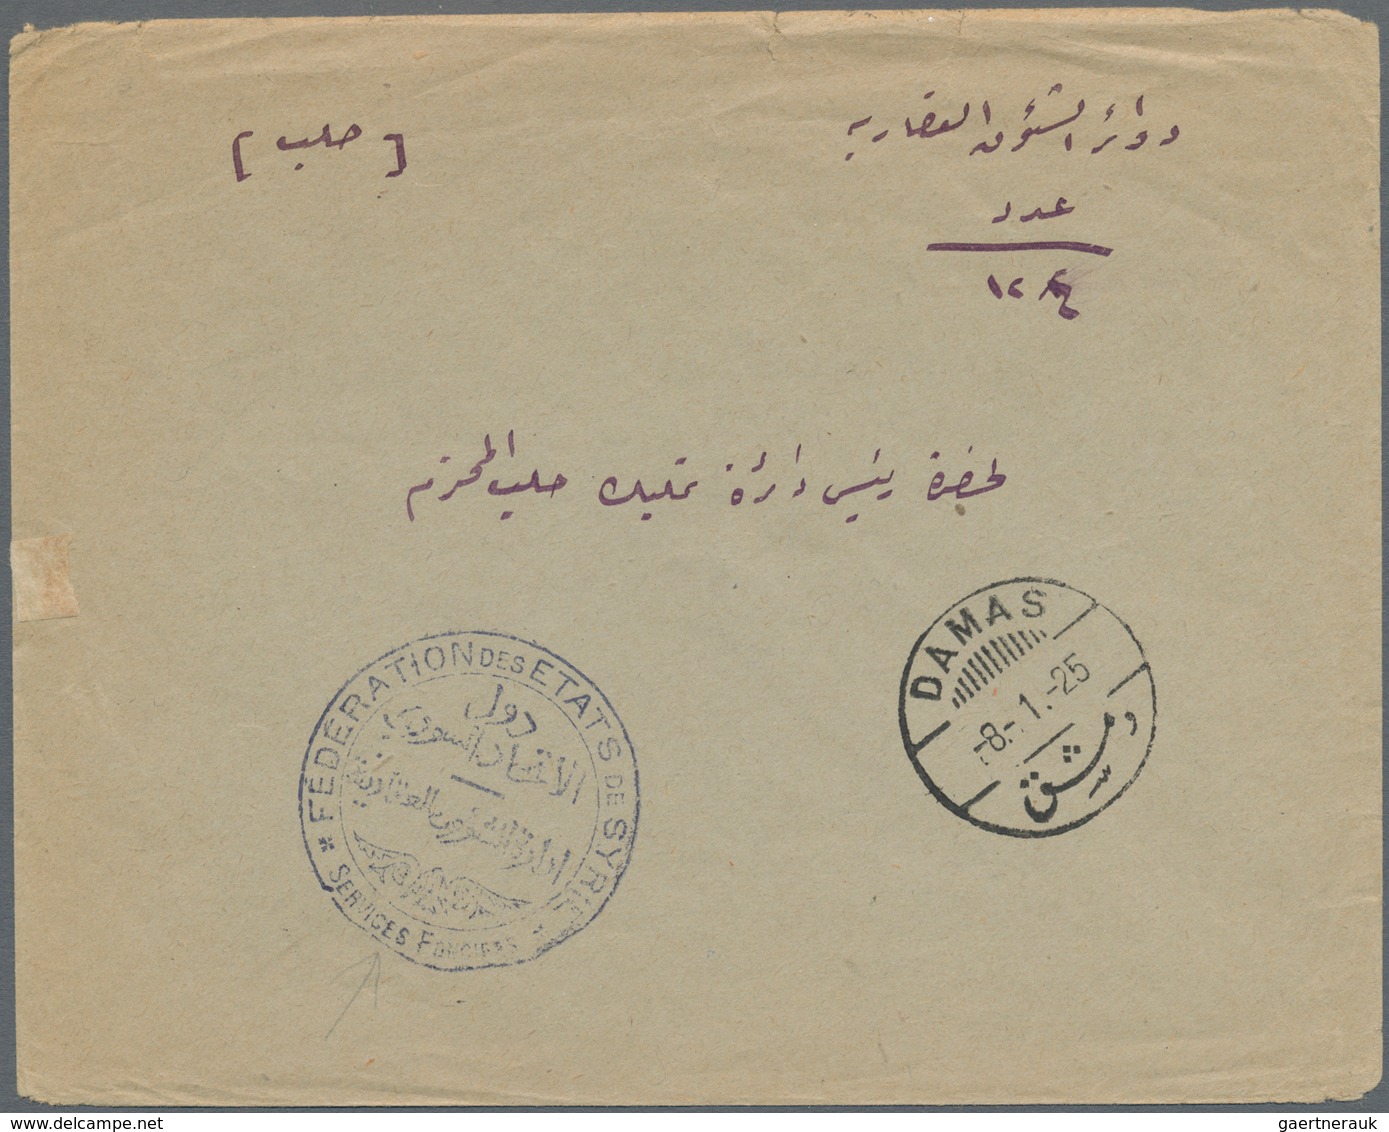 Syrien: 1899-1960, 30 Covers & Cards From Ottoman Period To Modern, Early Overprinted Issues, Air Ma - Syrië